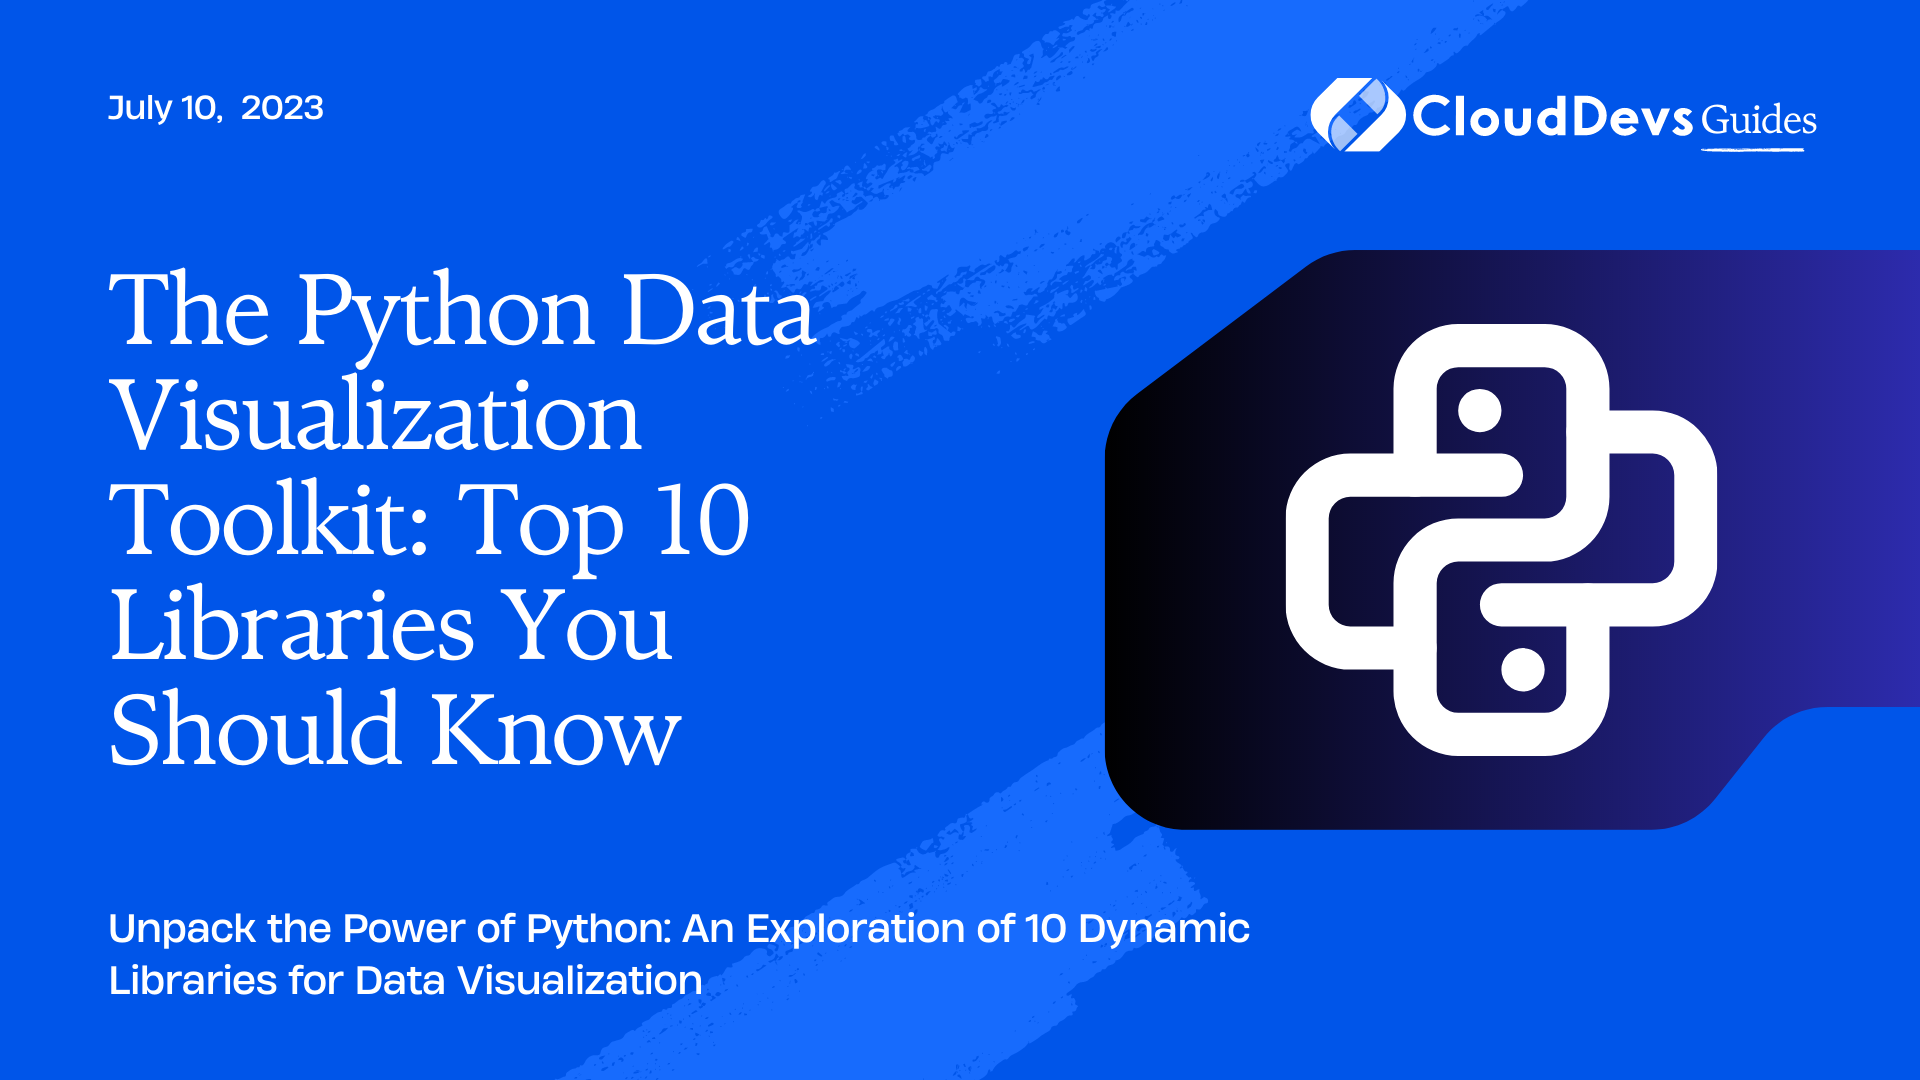 The Python Data Visualization Toolkit: Top 10 Libraries You Should Know